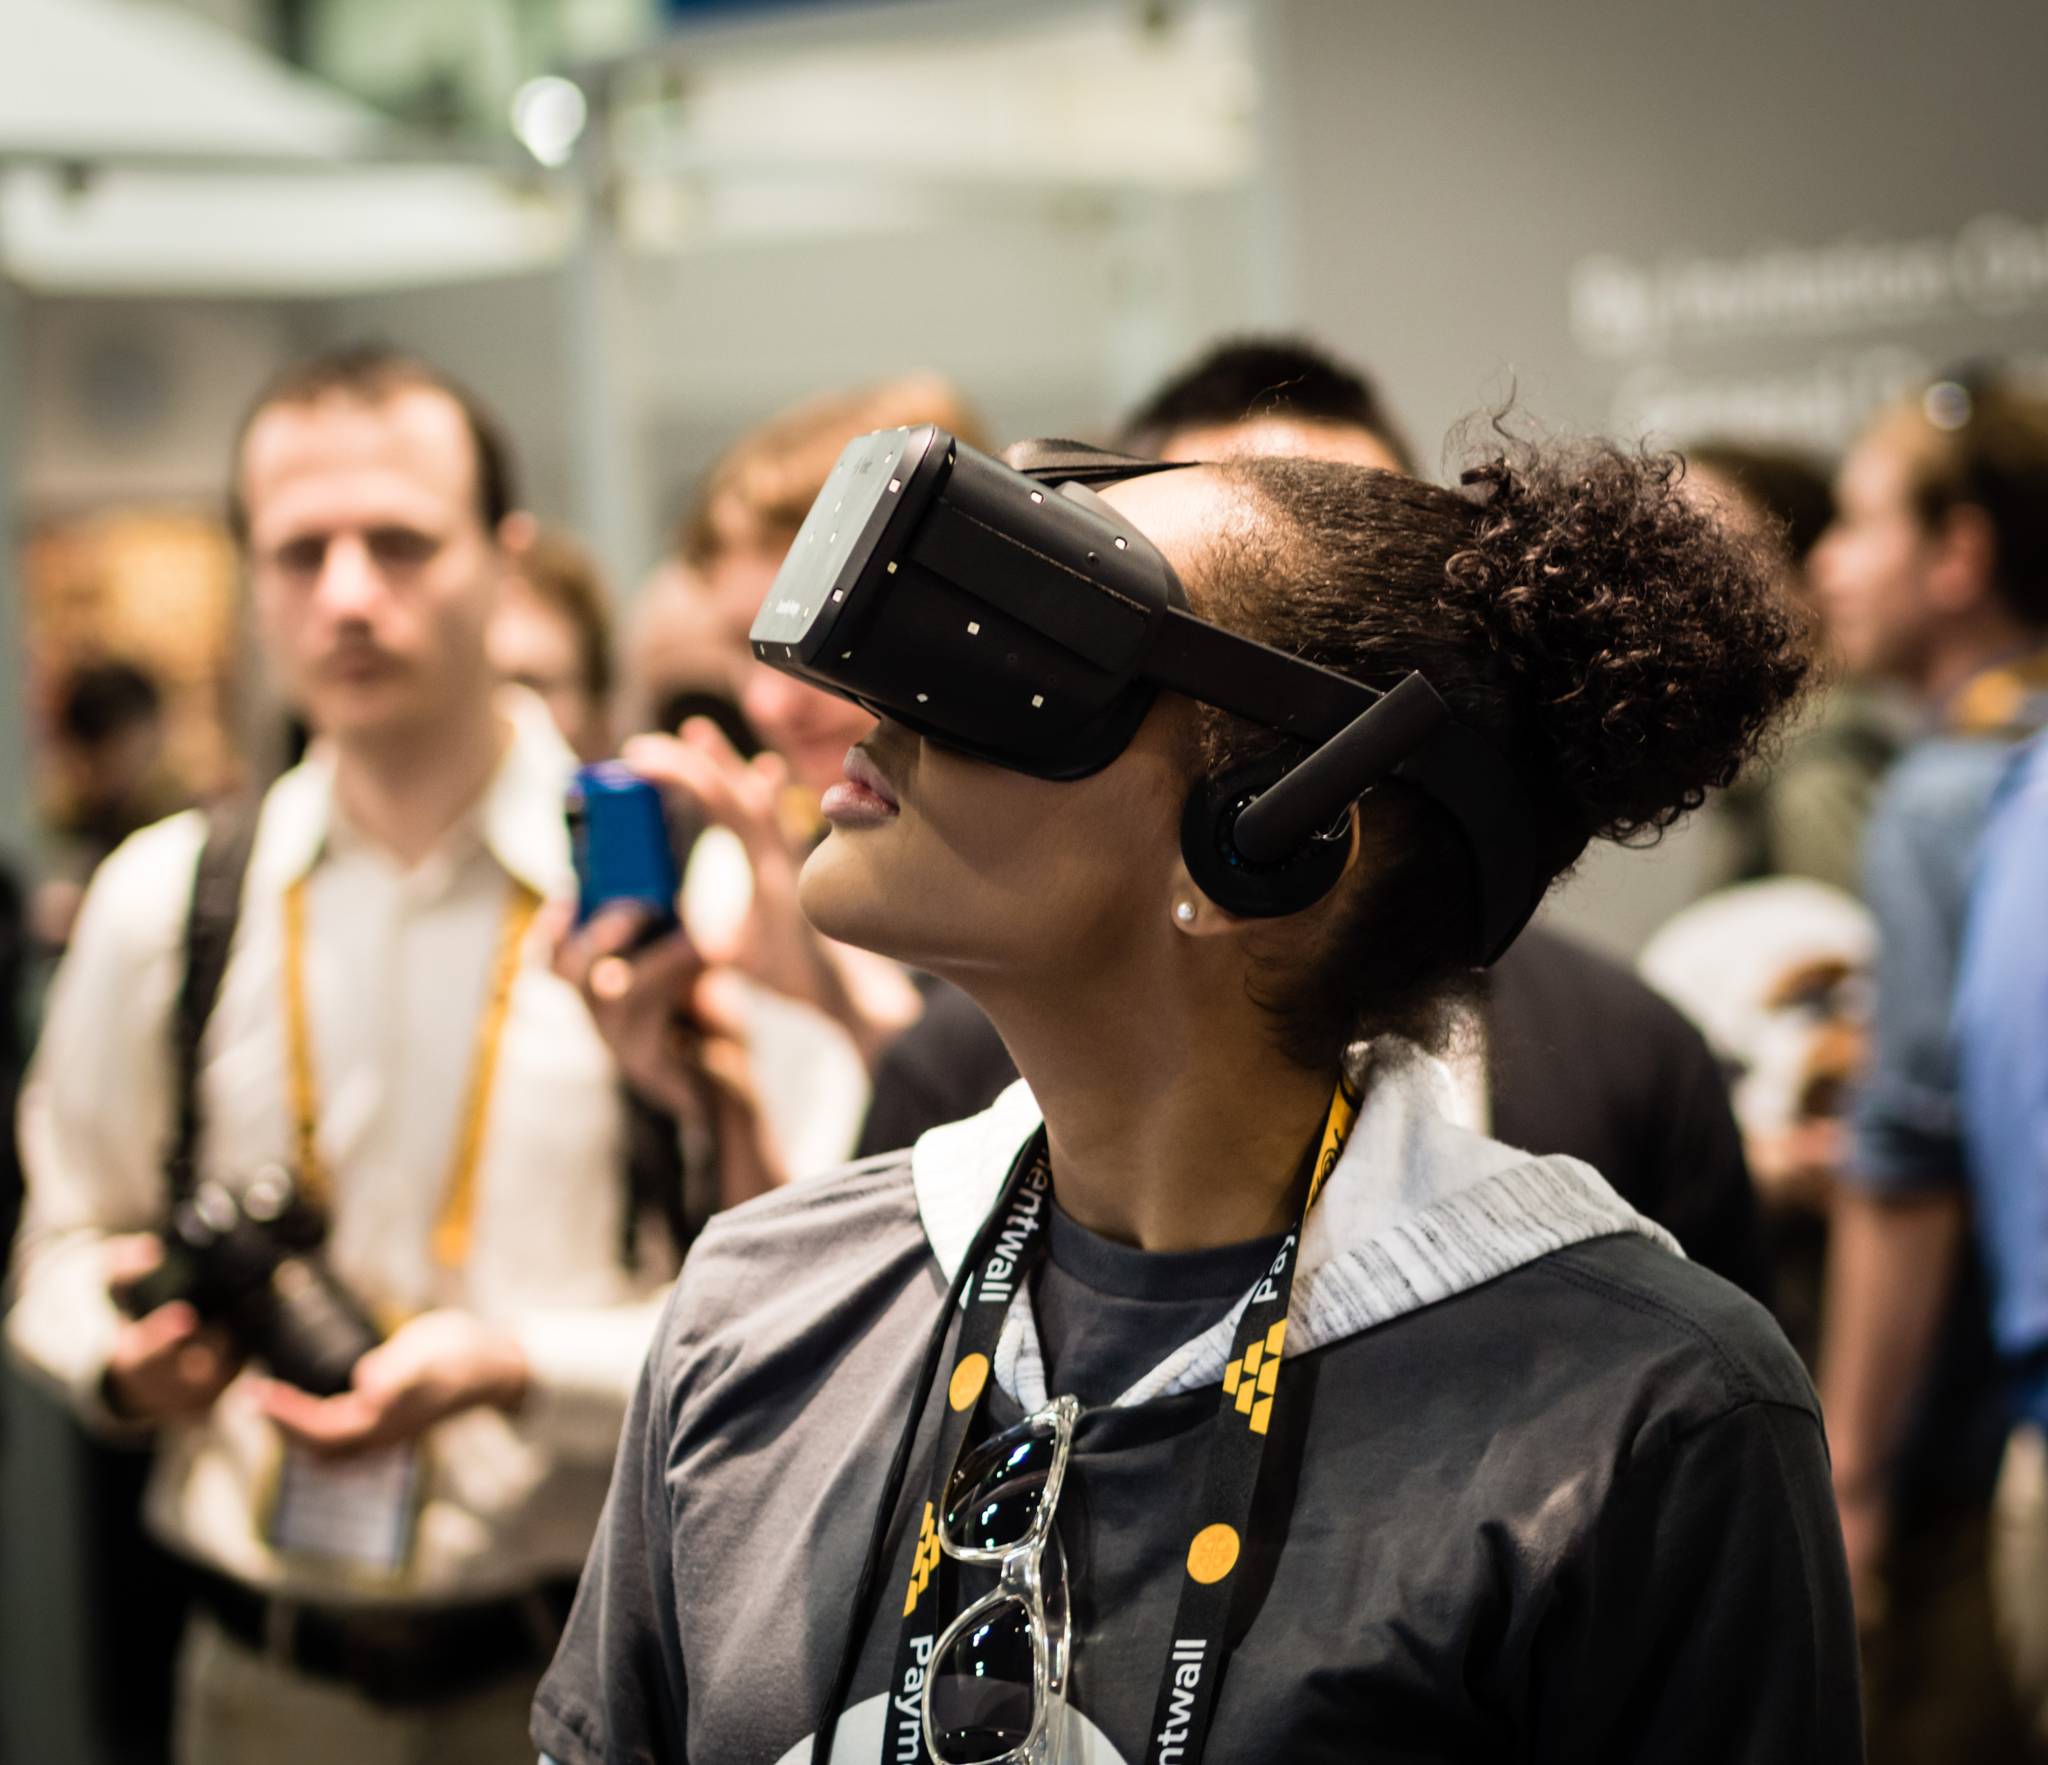 What's the future for virtual reality?